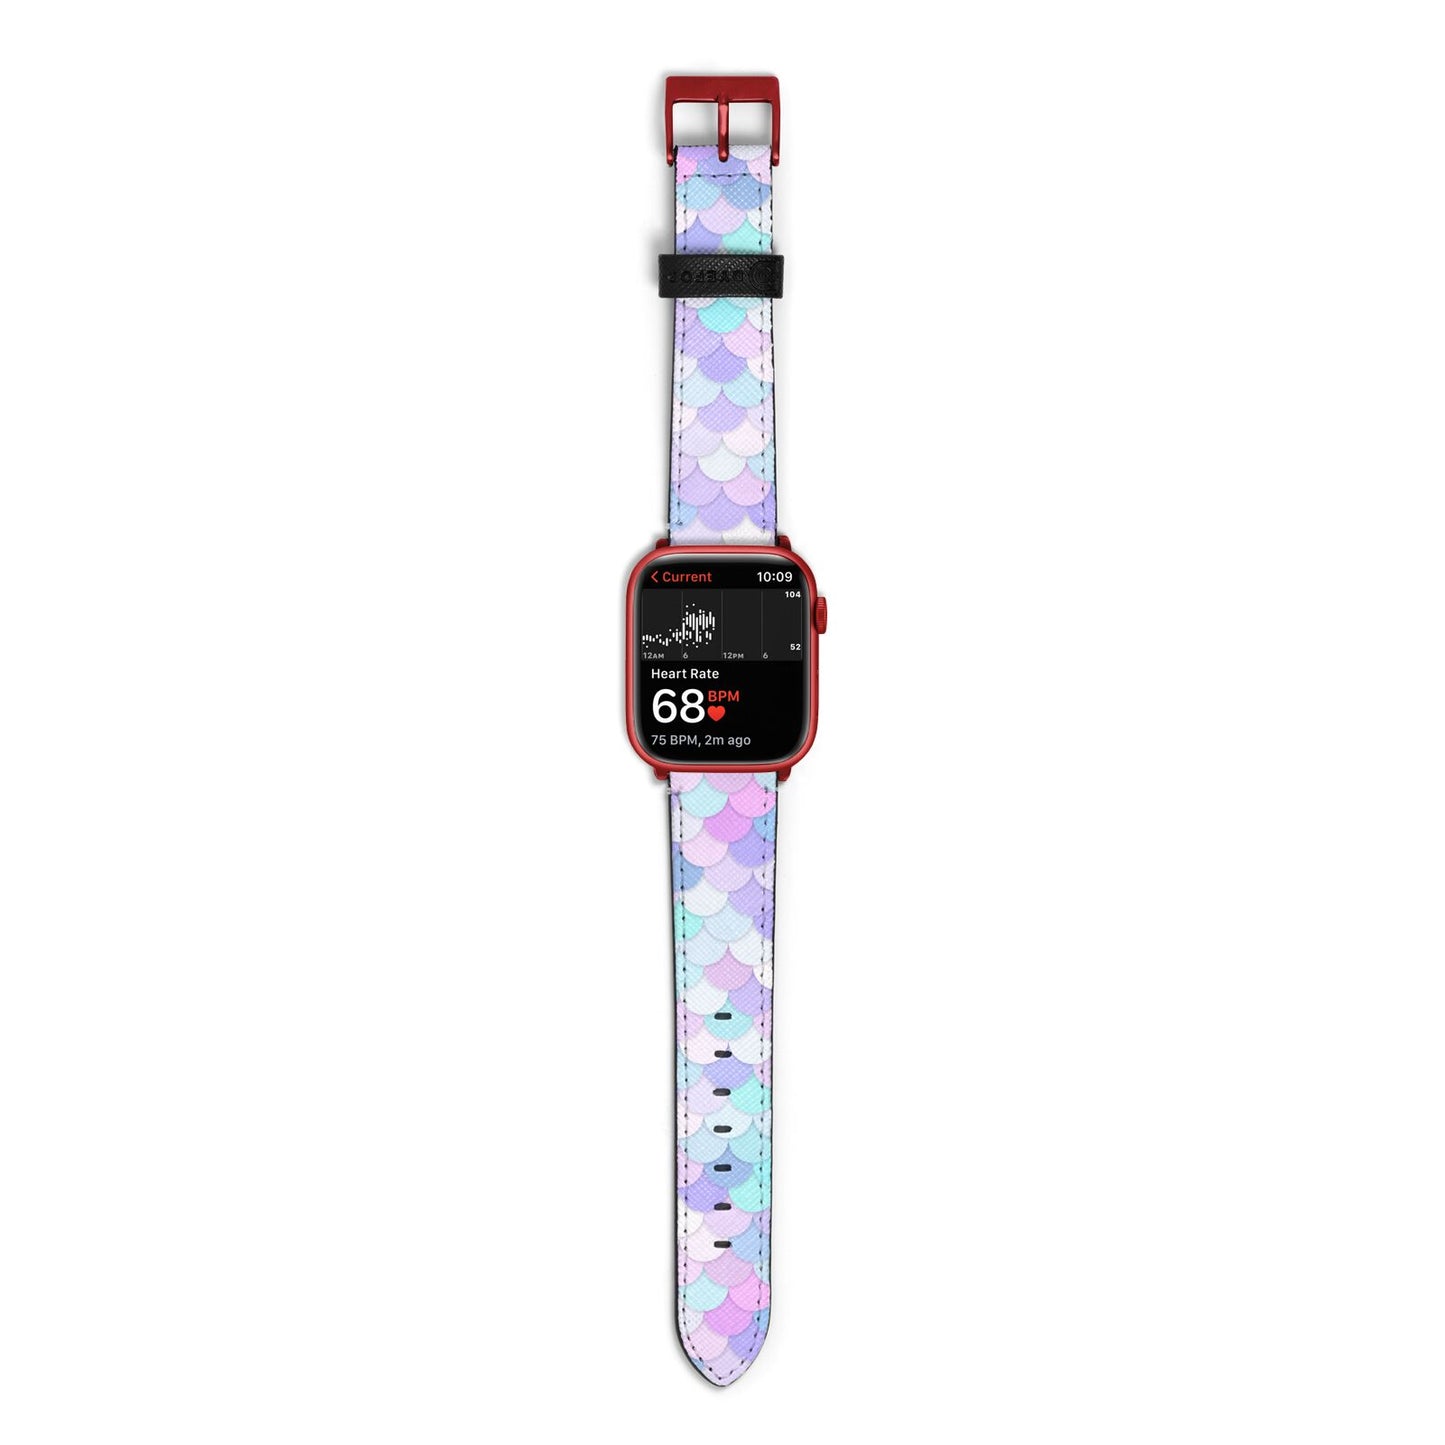 Mermaid Apple Watch Strap Size 38mm with Red Hardware